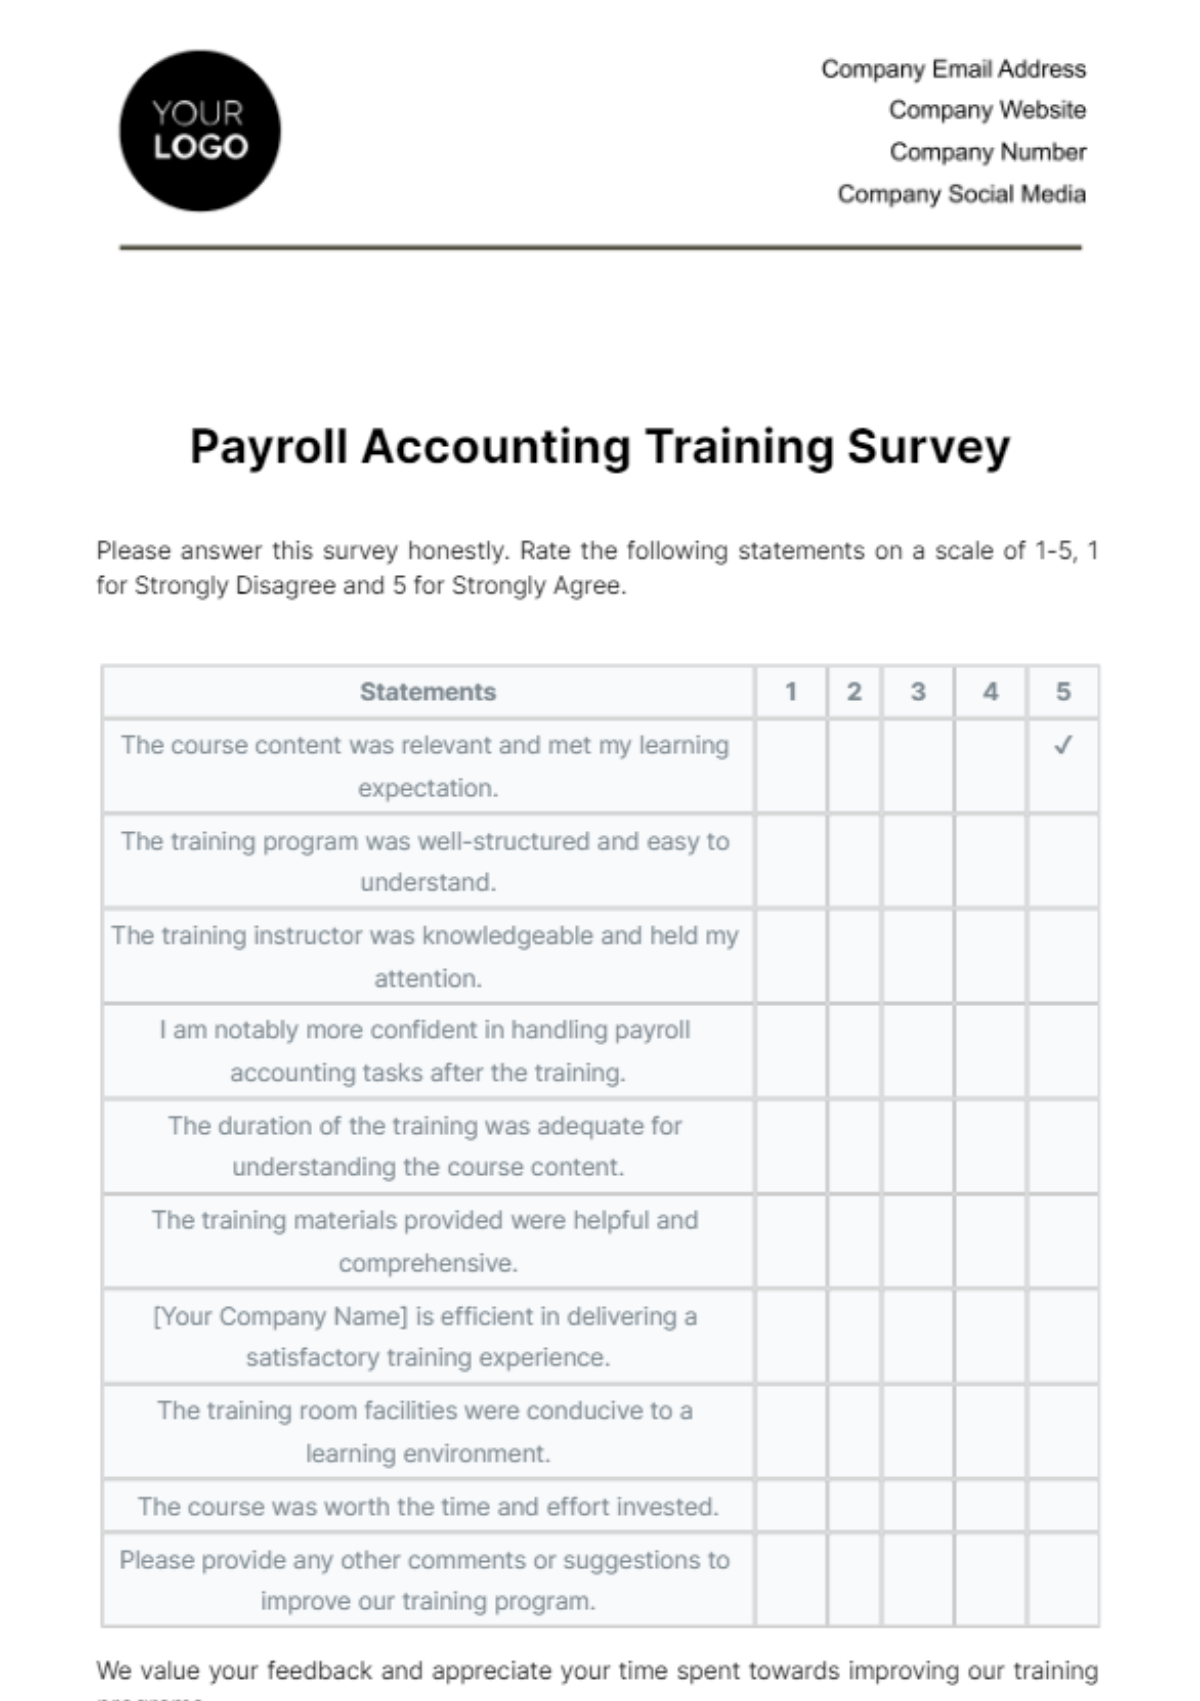 Payroll Accounting Training Survey Template